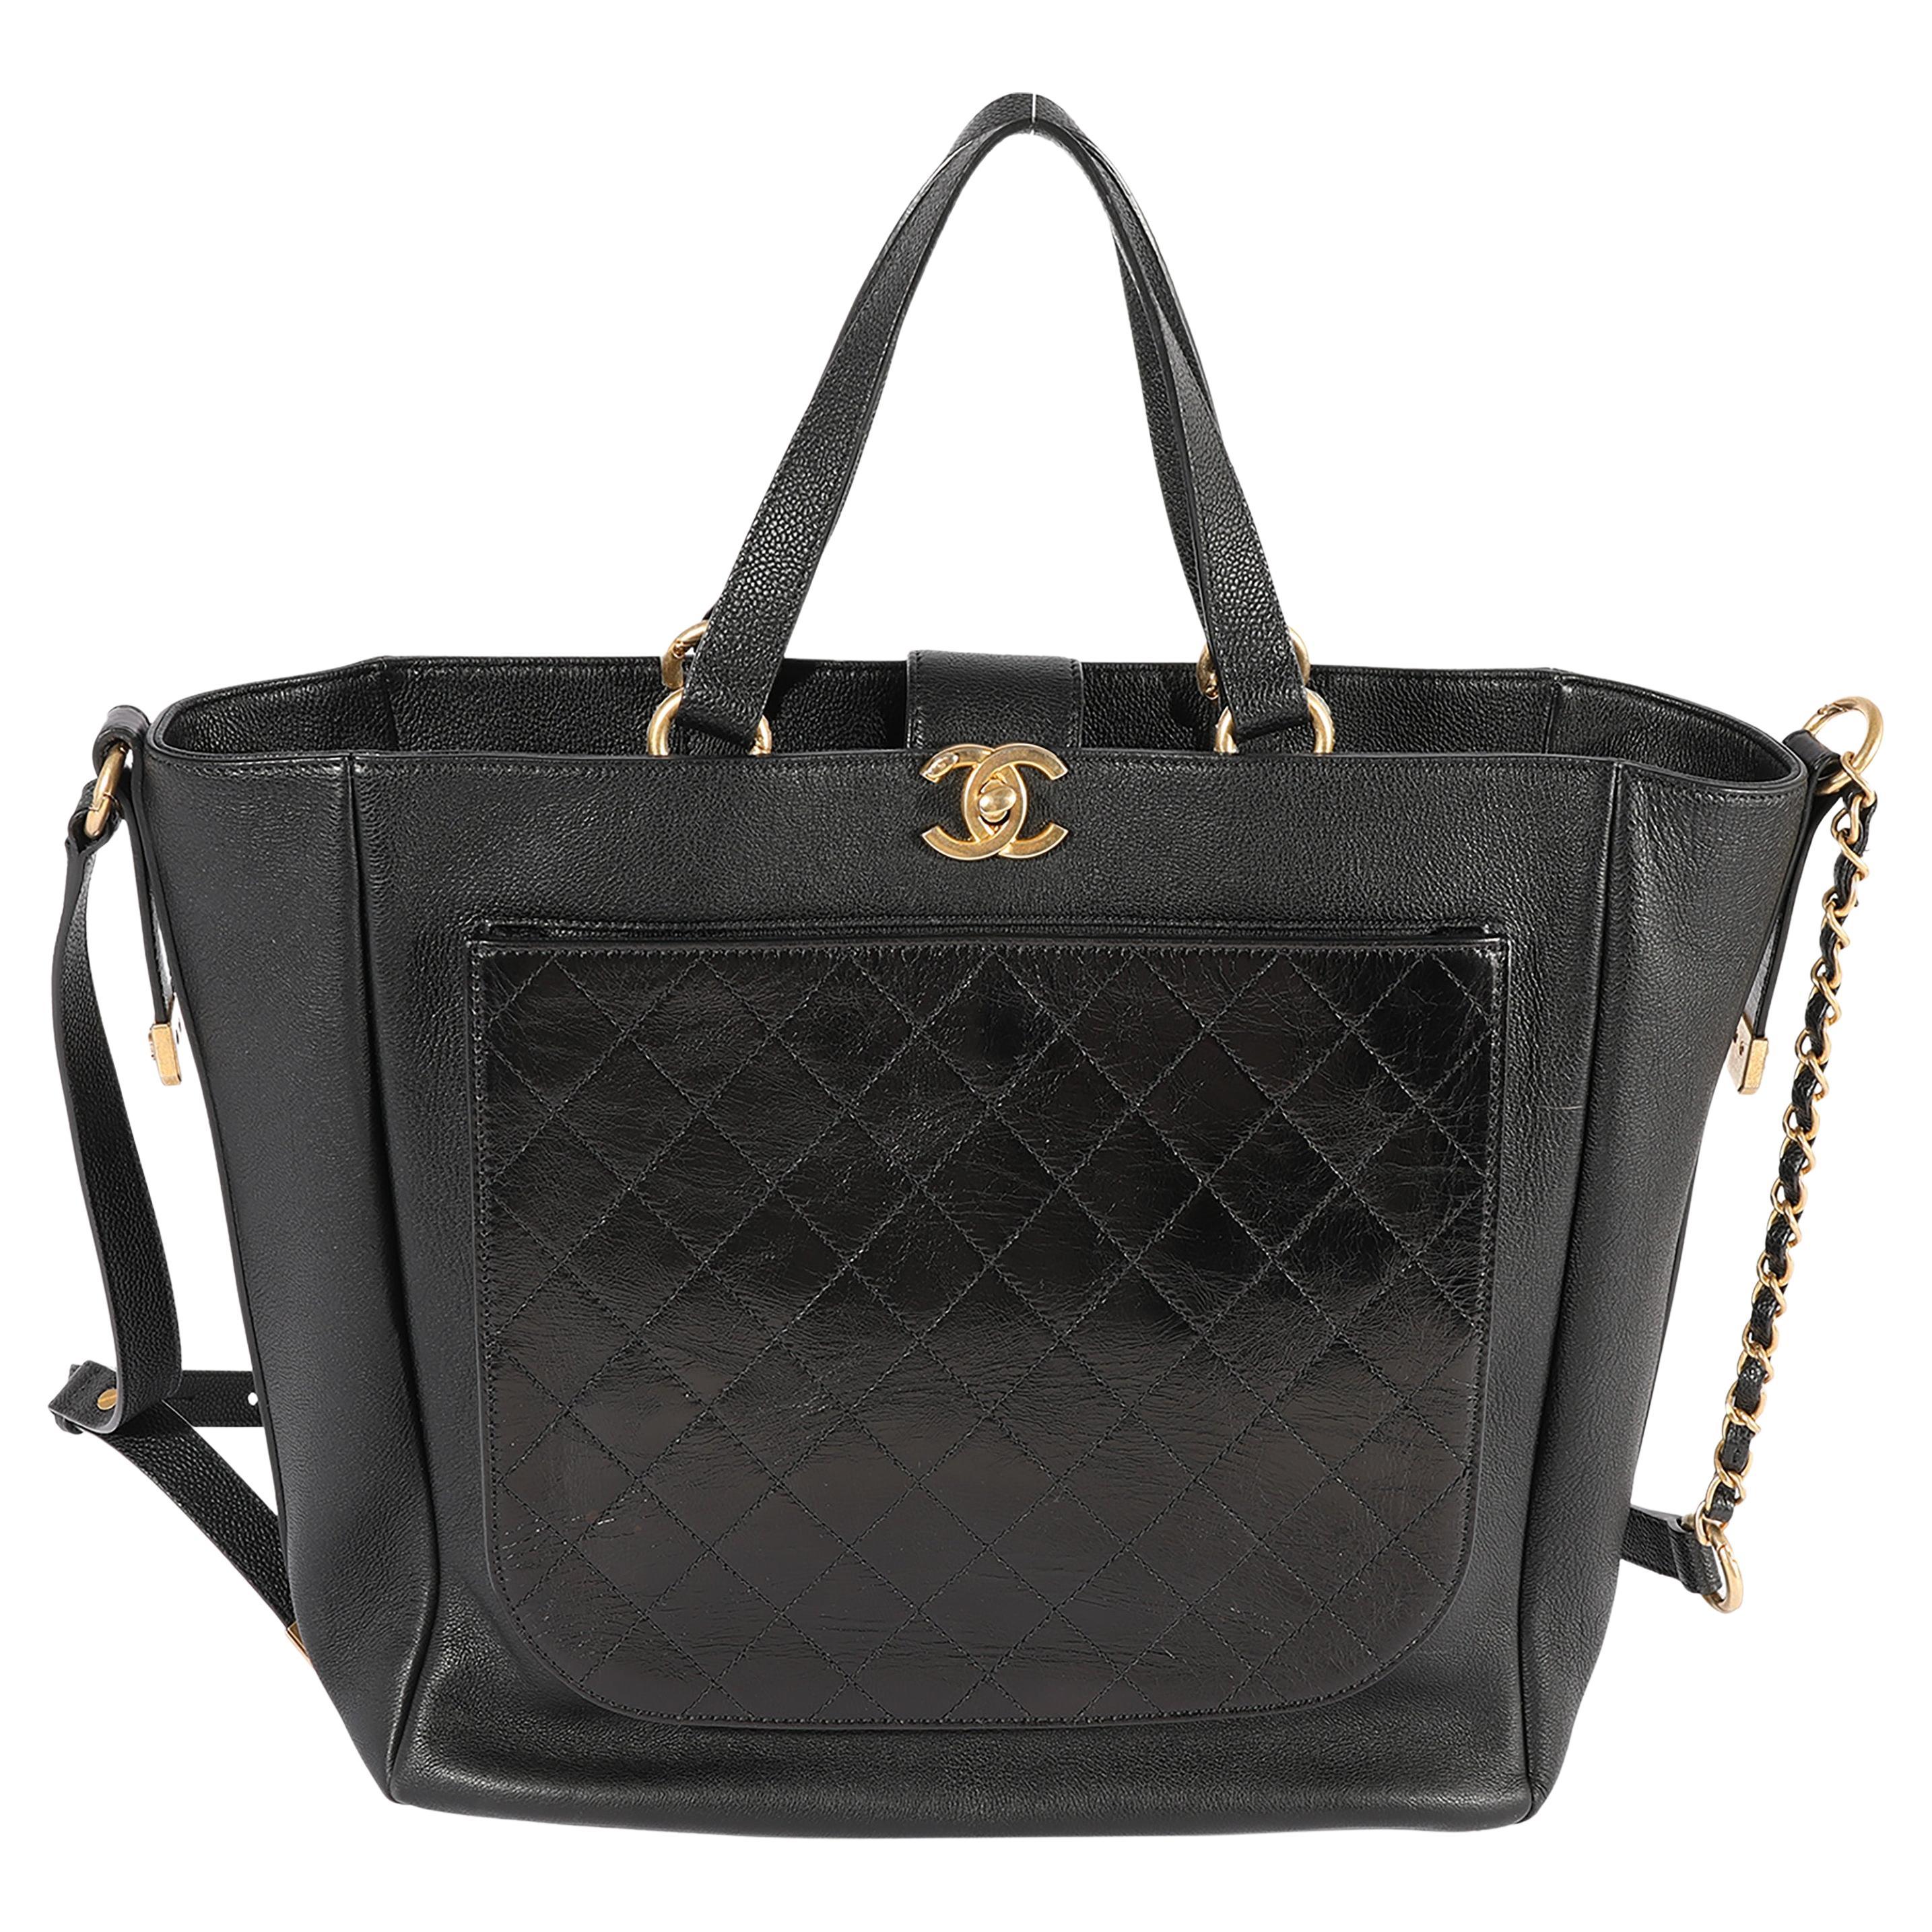 Chanel Black Quilted Calfskin Shopping Tote